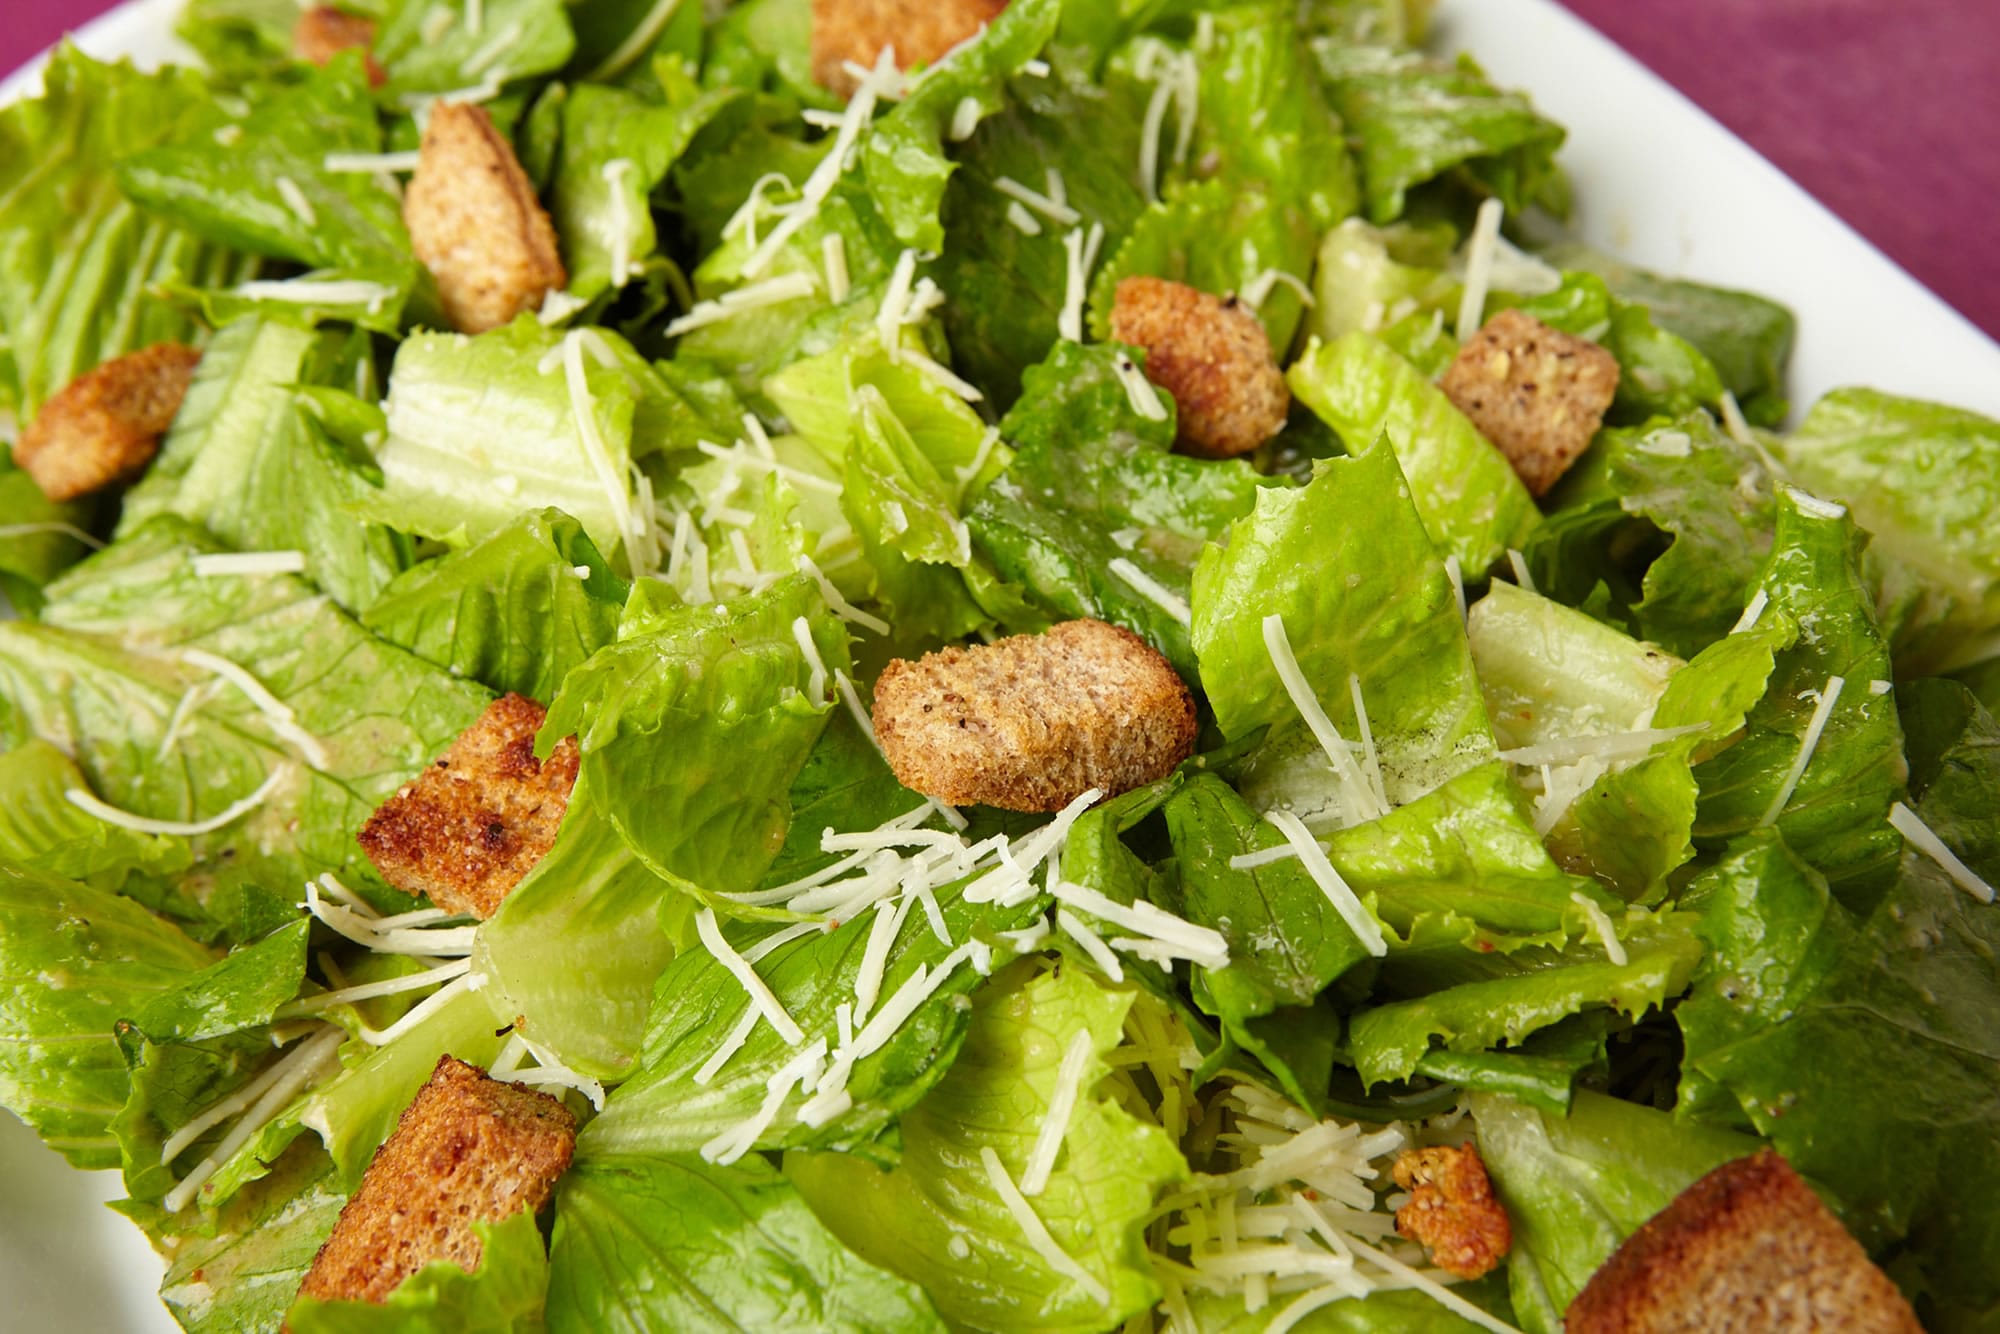 Lightened-Up Ceasar Salad uses cannelloni beans to provide the creaminess in the dressing.